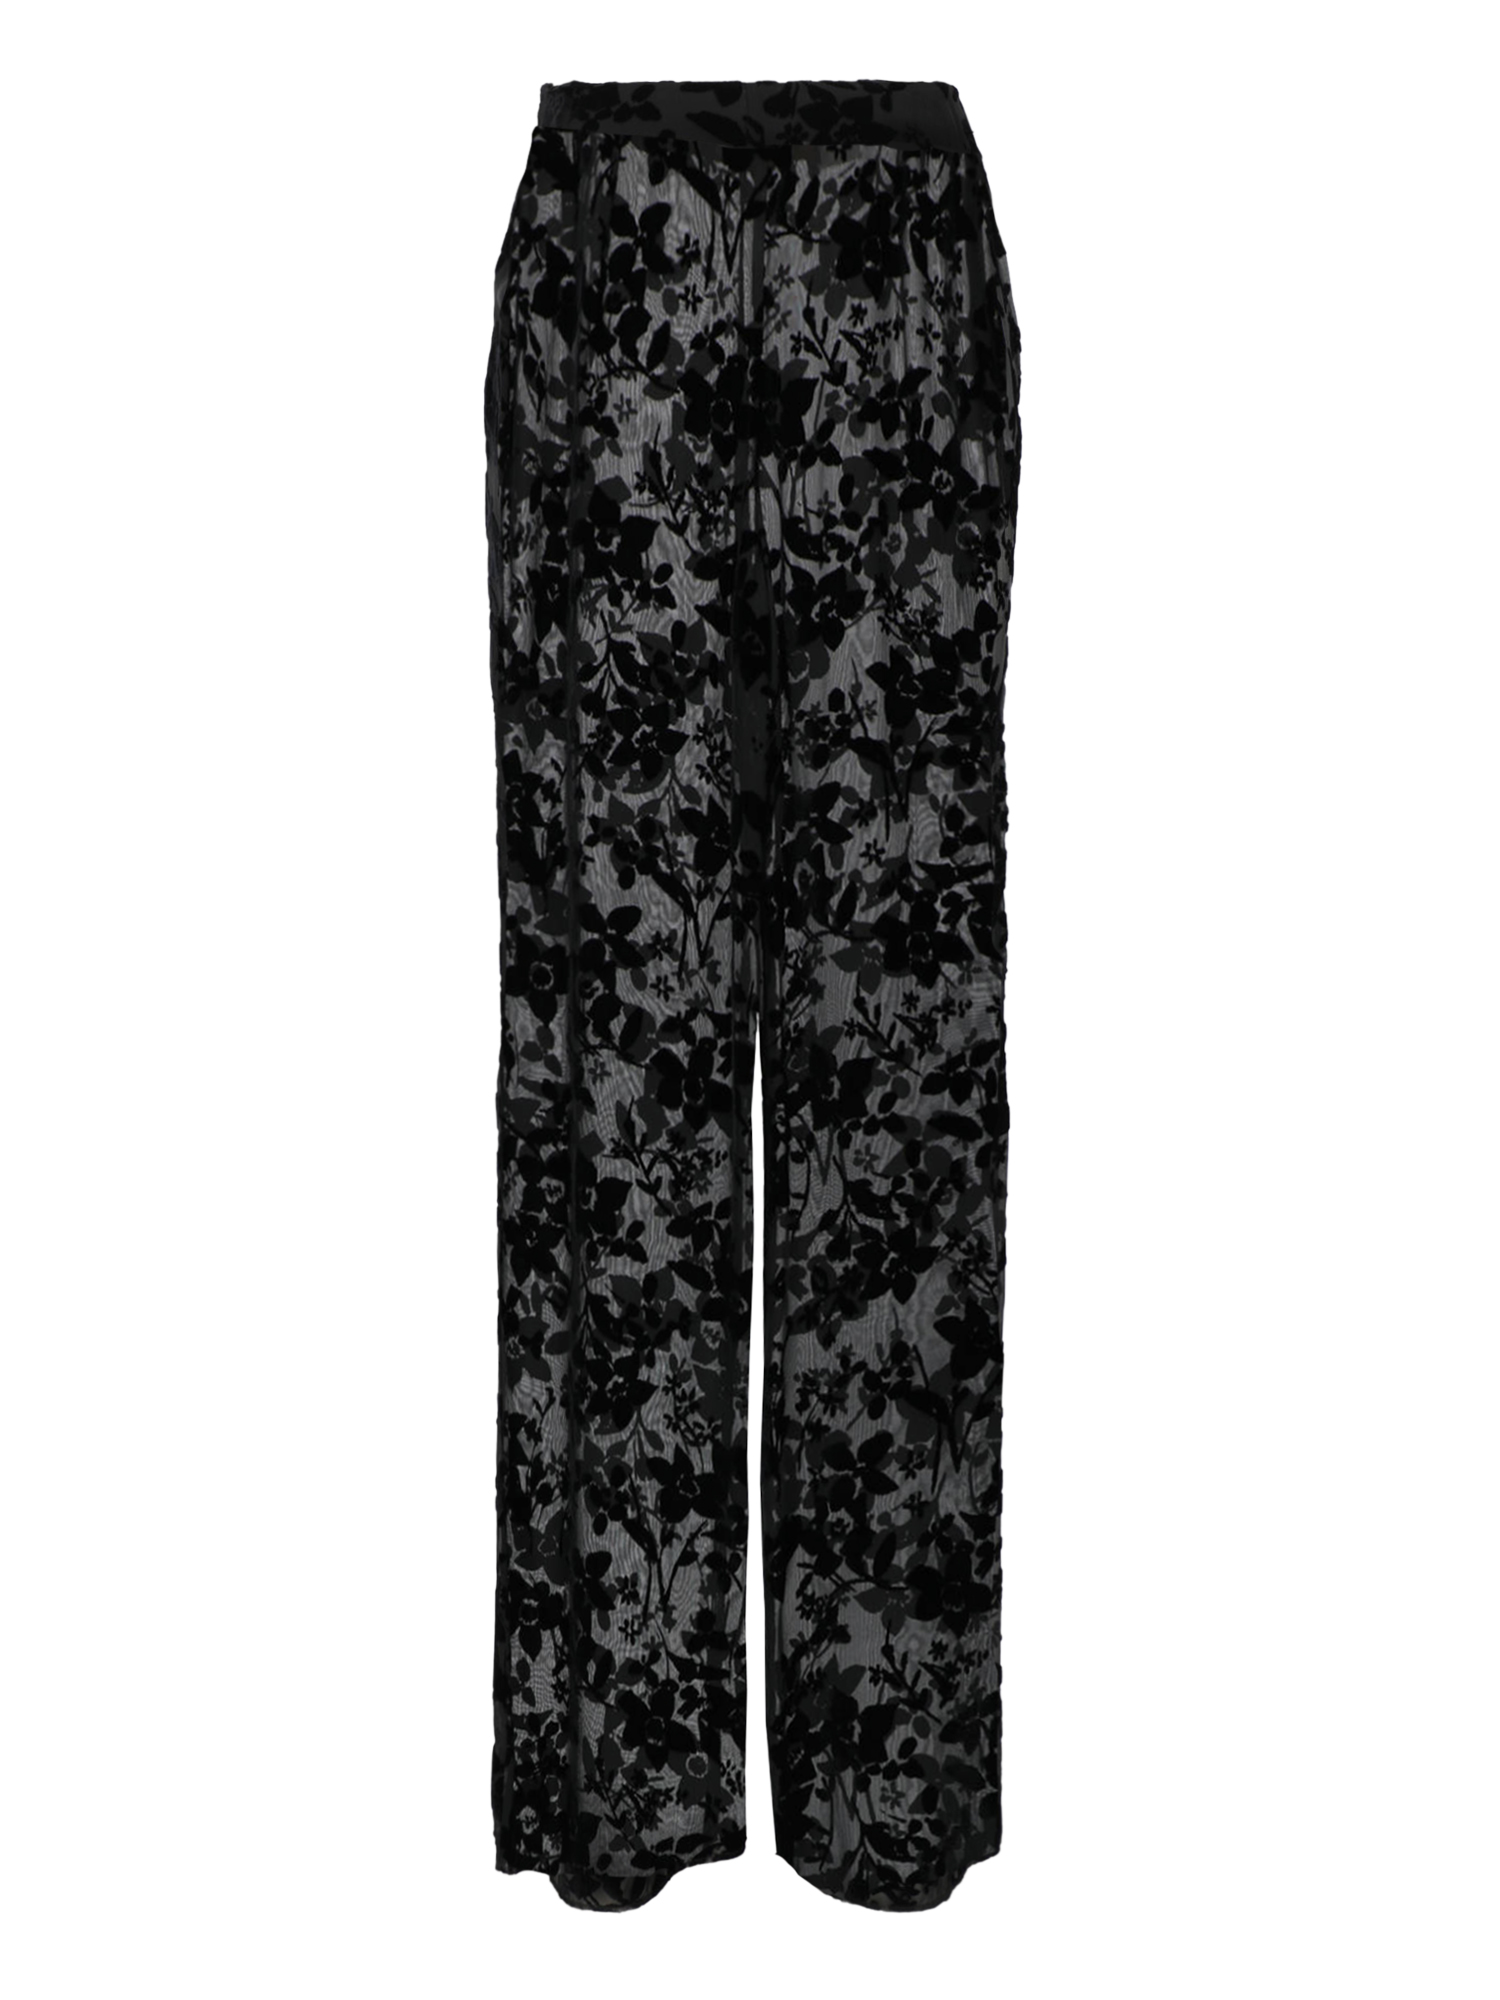 Condition: New With Tag, Floral Print Synthetic Fibers, Color: Black - M - IT 42 -